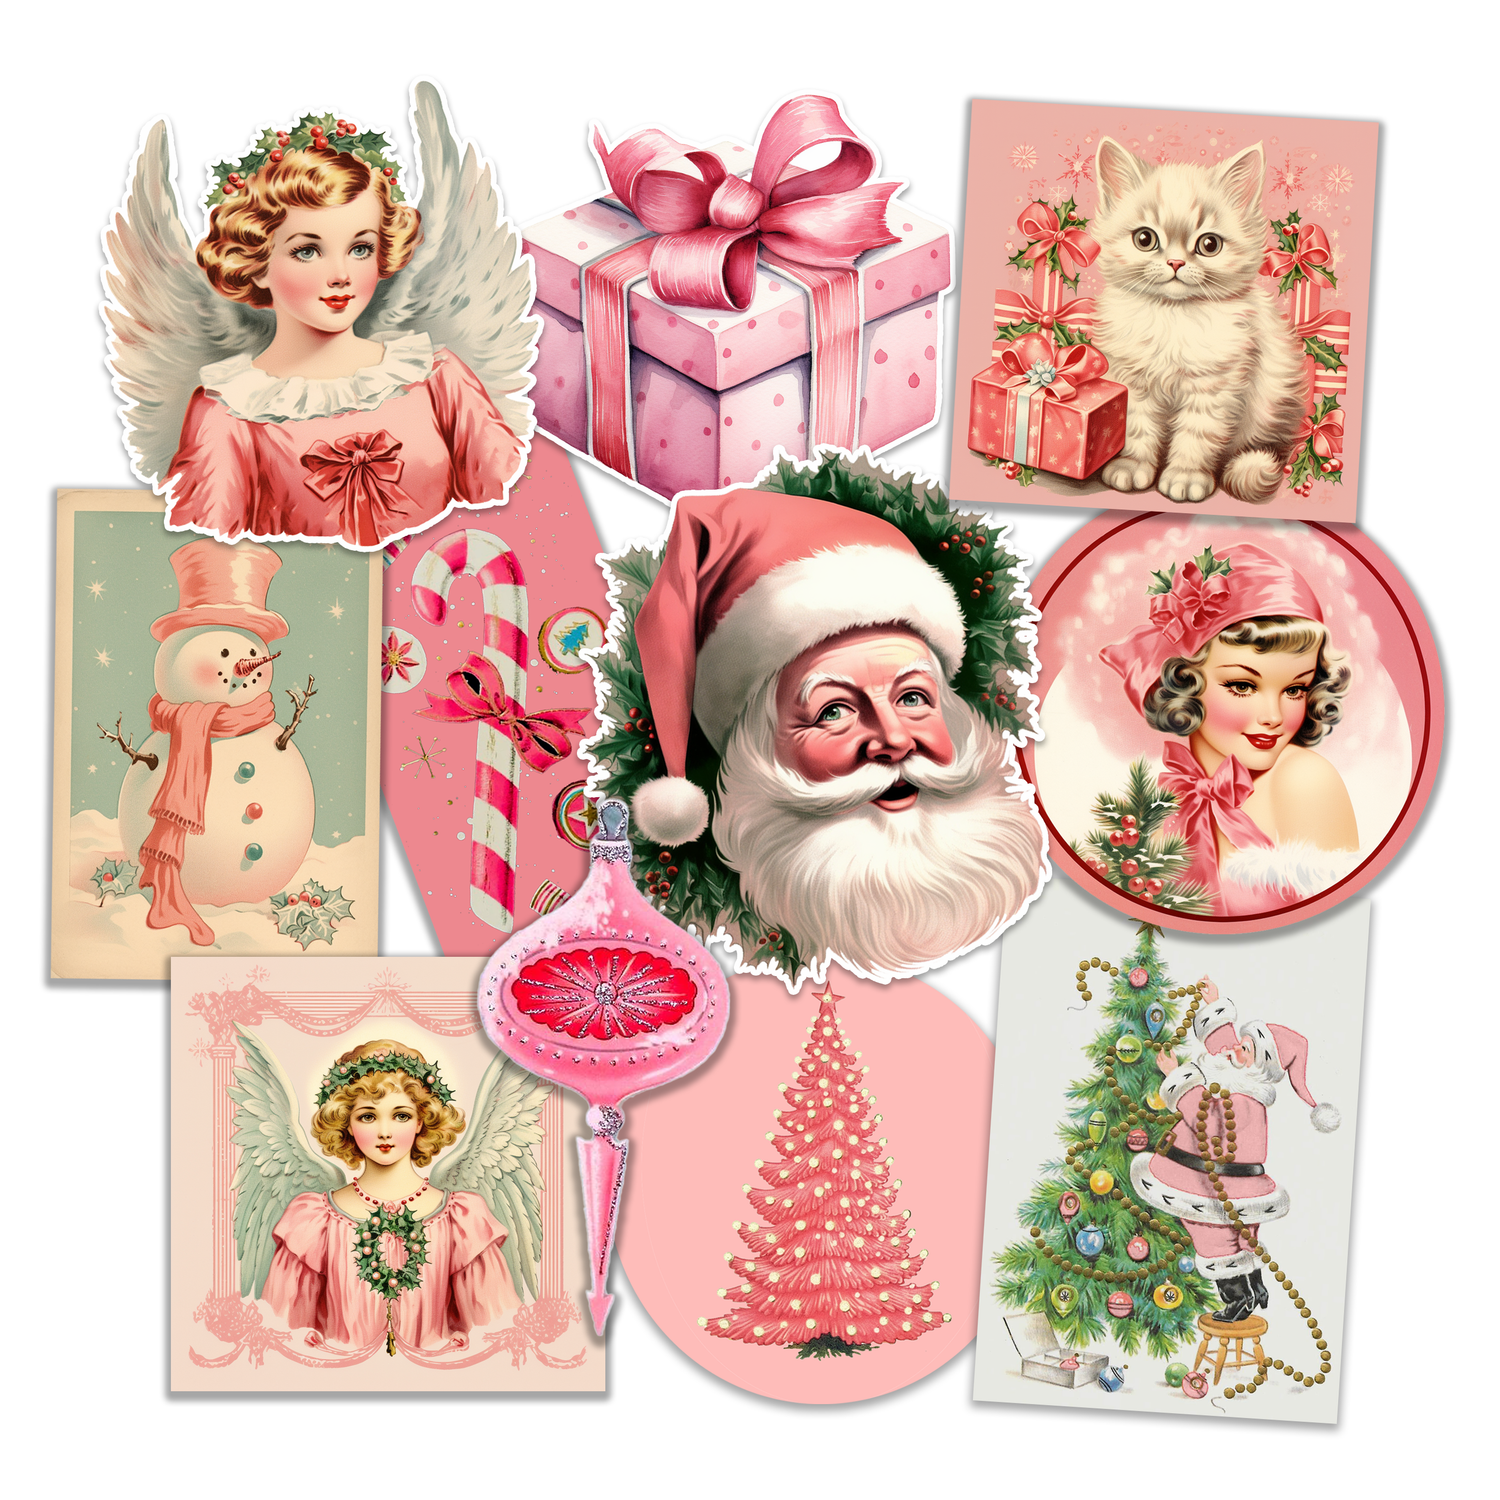 royalty free vintage christmas images